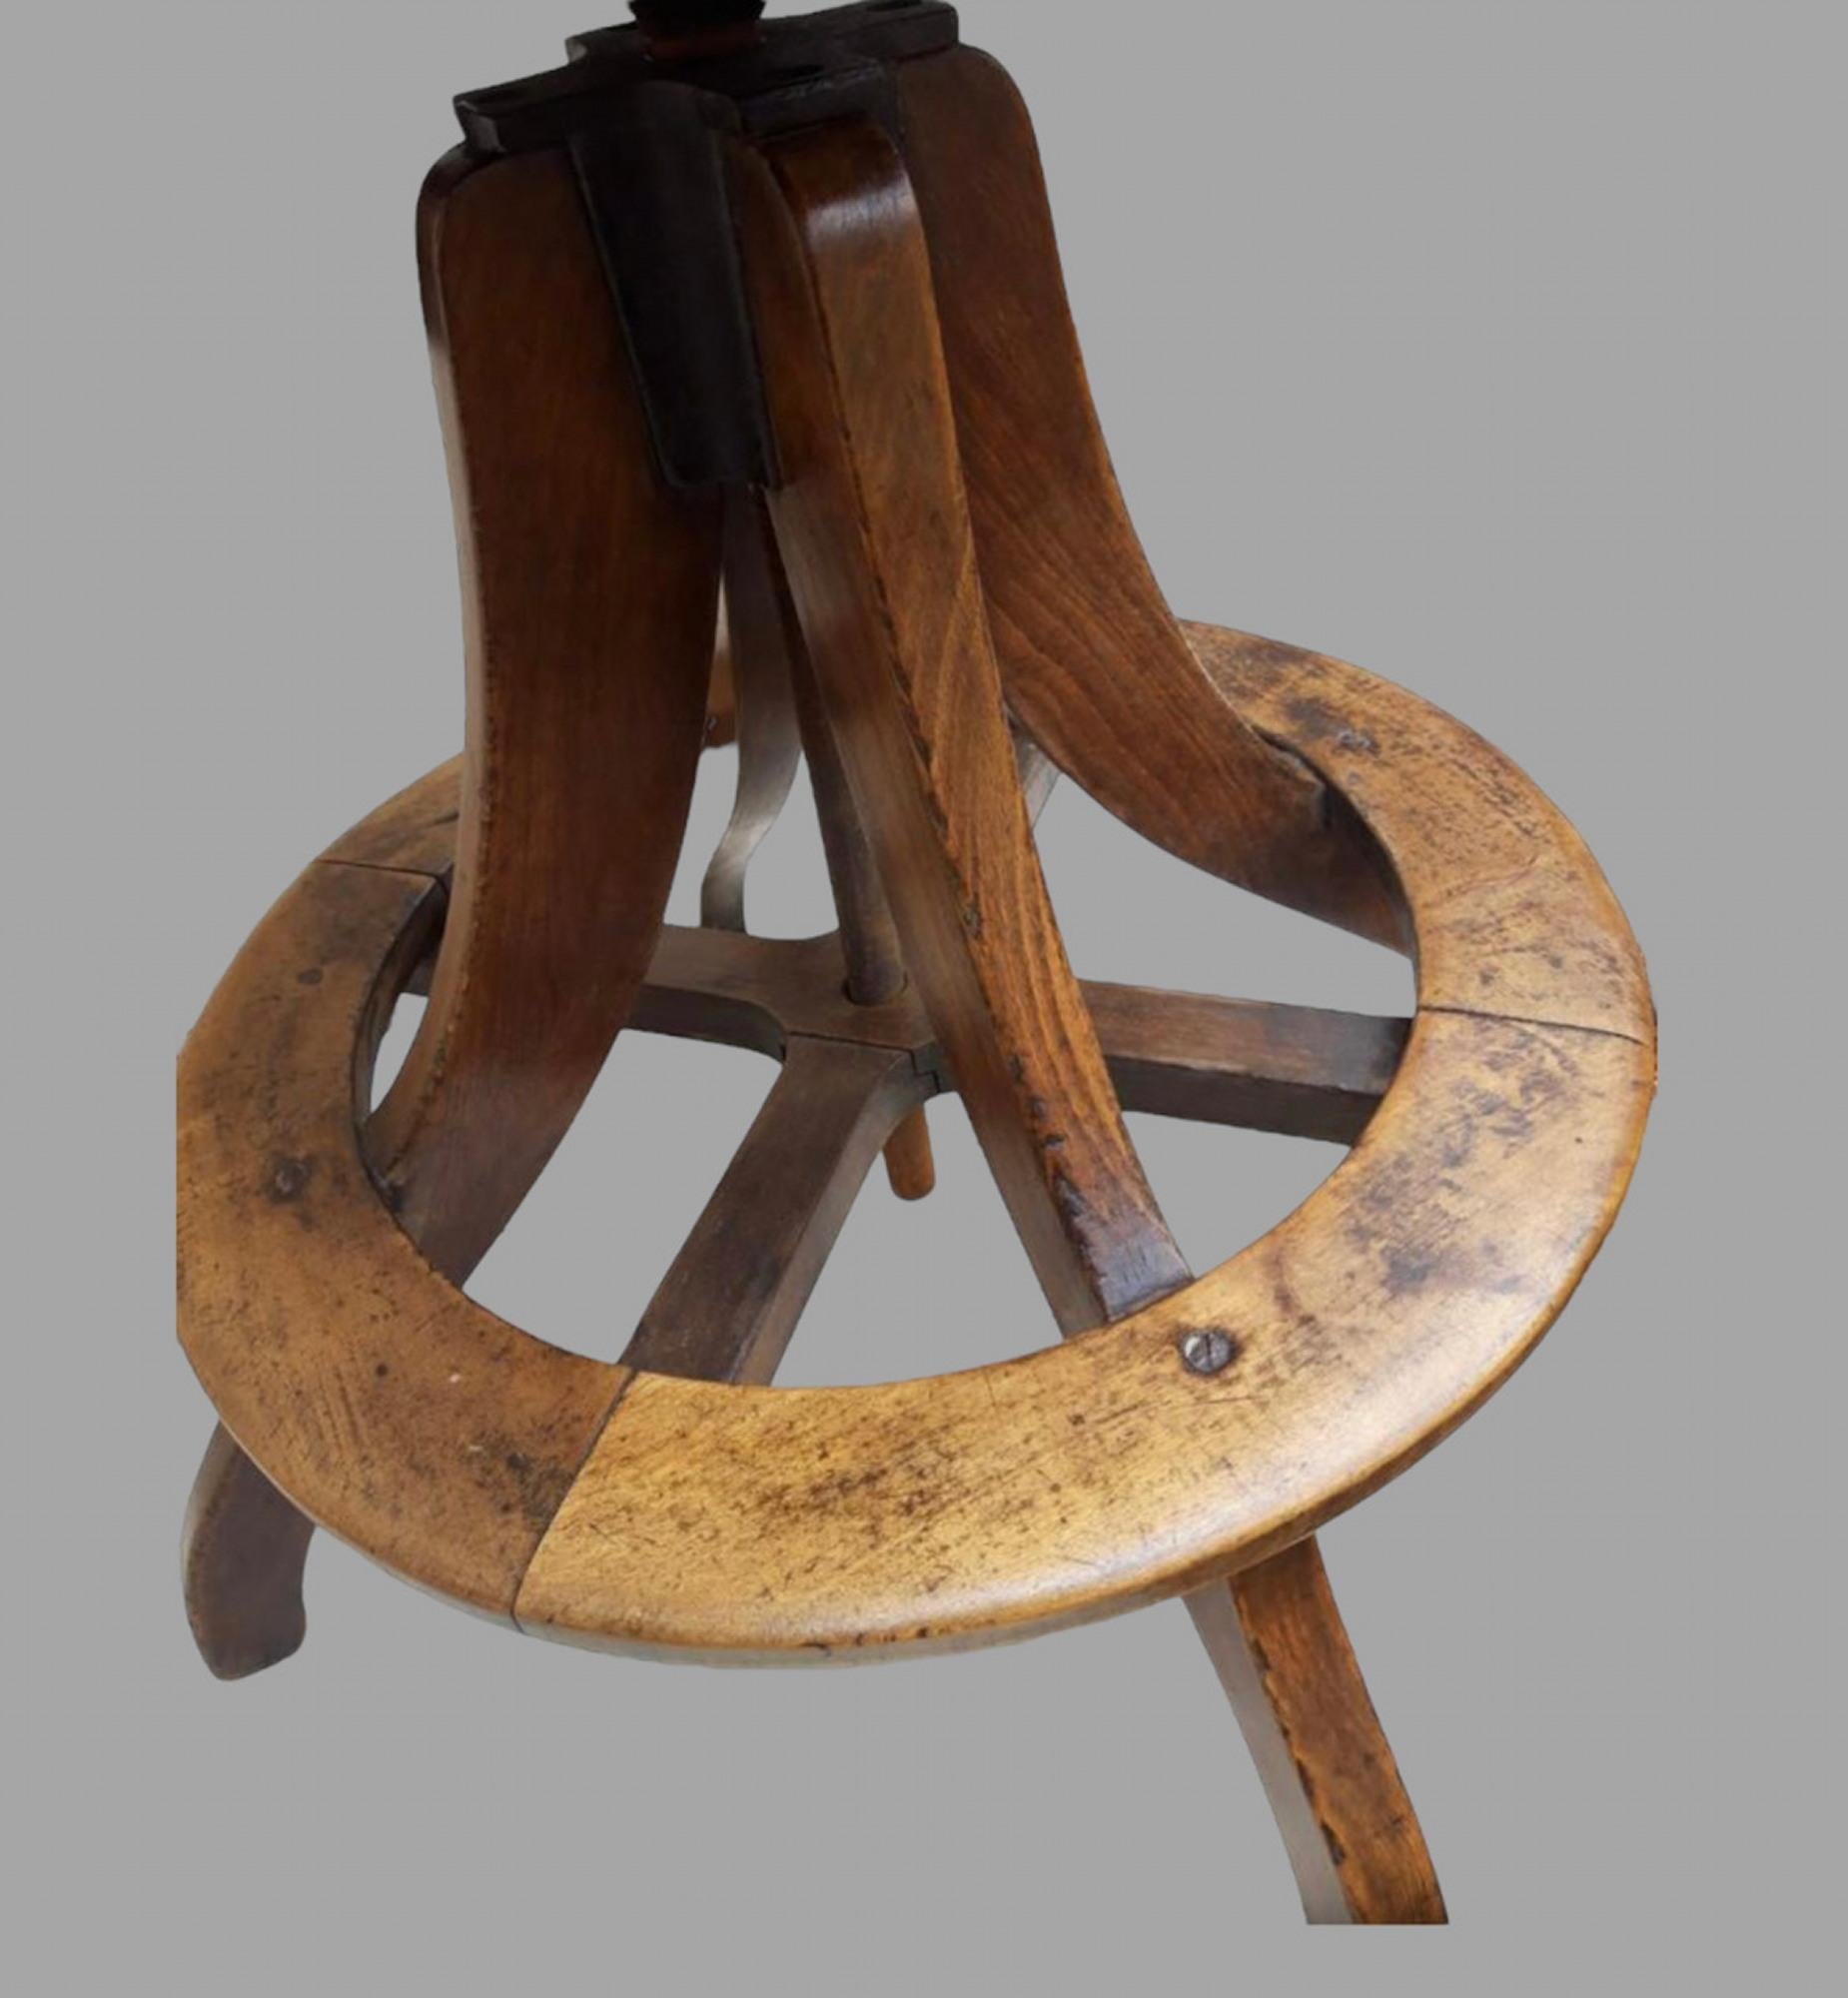 Early 20th Century An Artists/Work Chair c1910